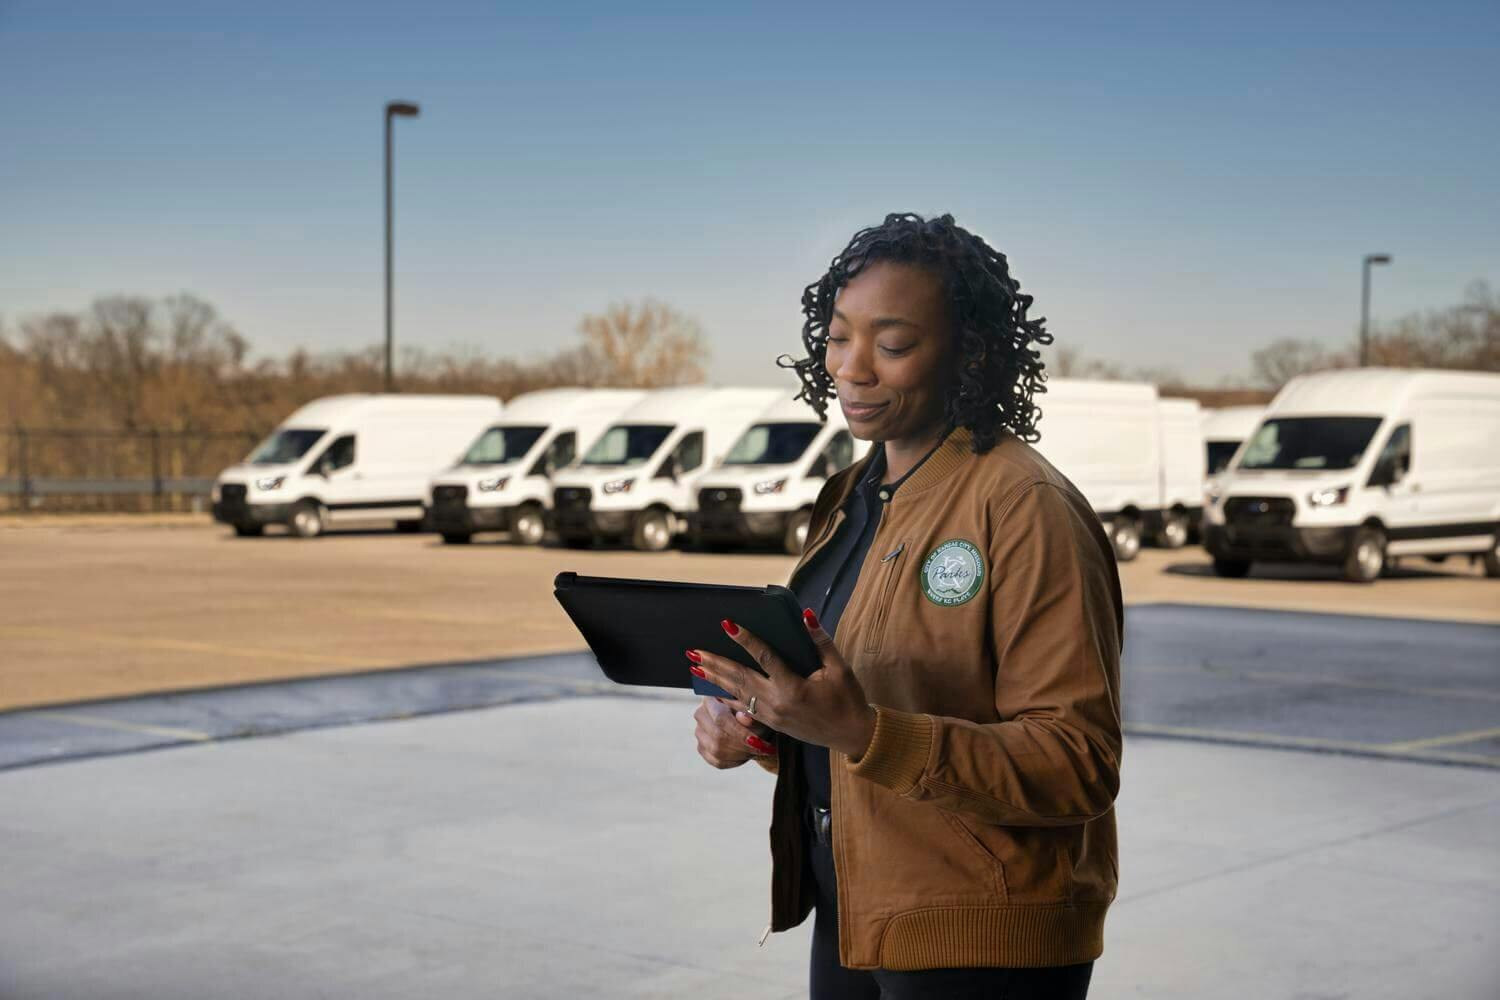 Woman holding an ipad with a fleet of vans behind her